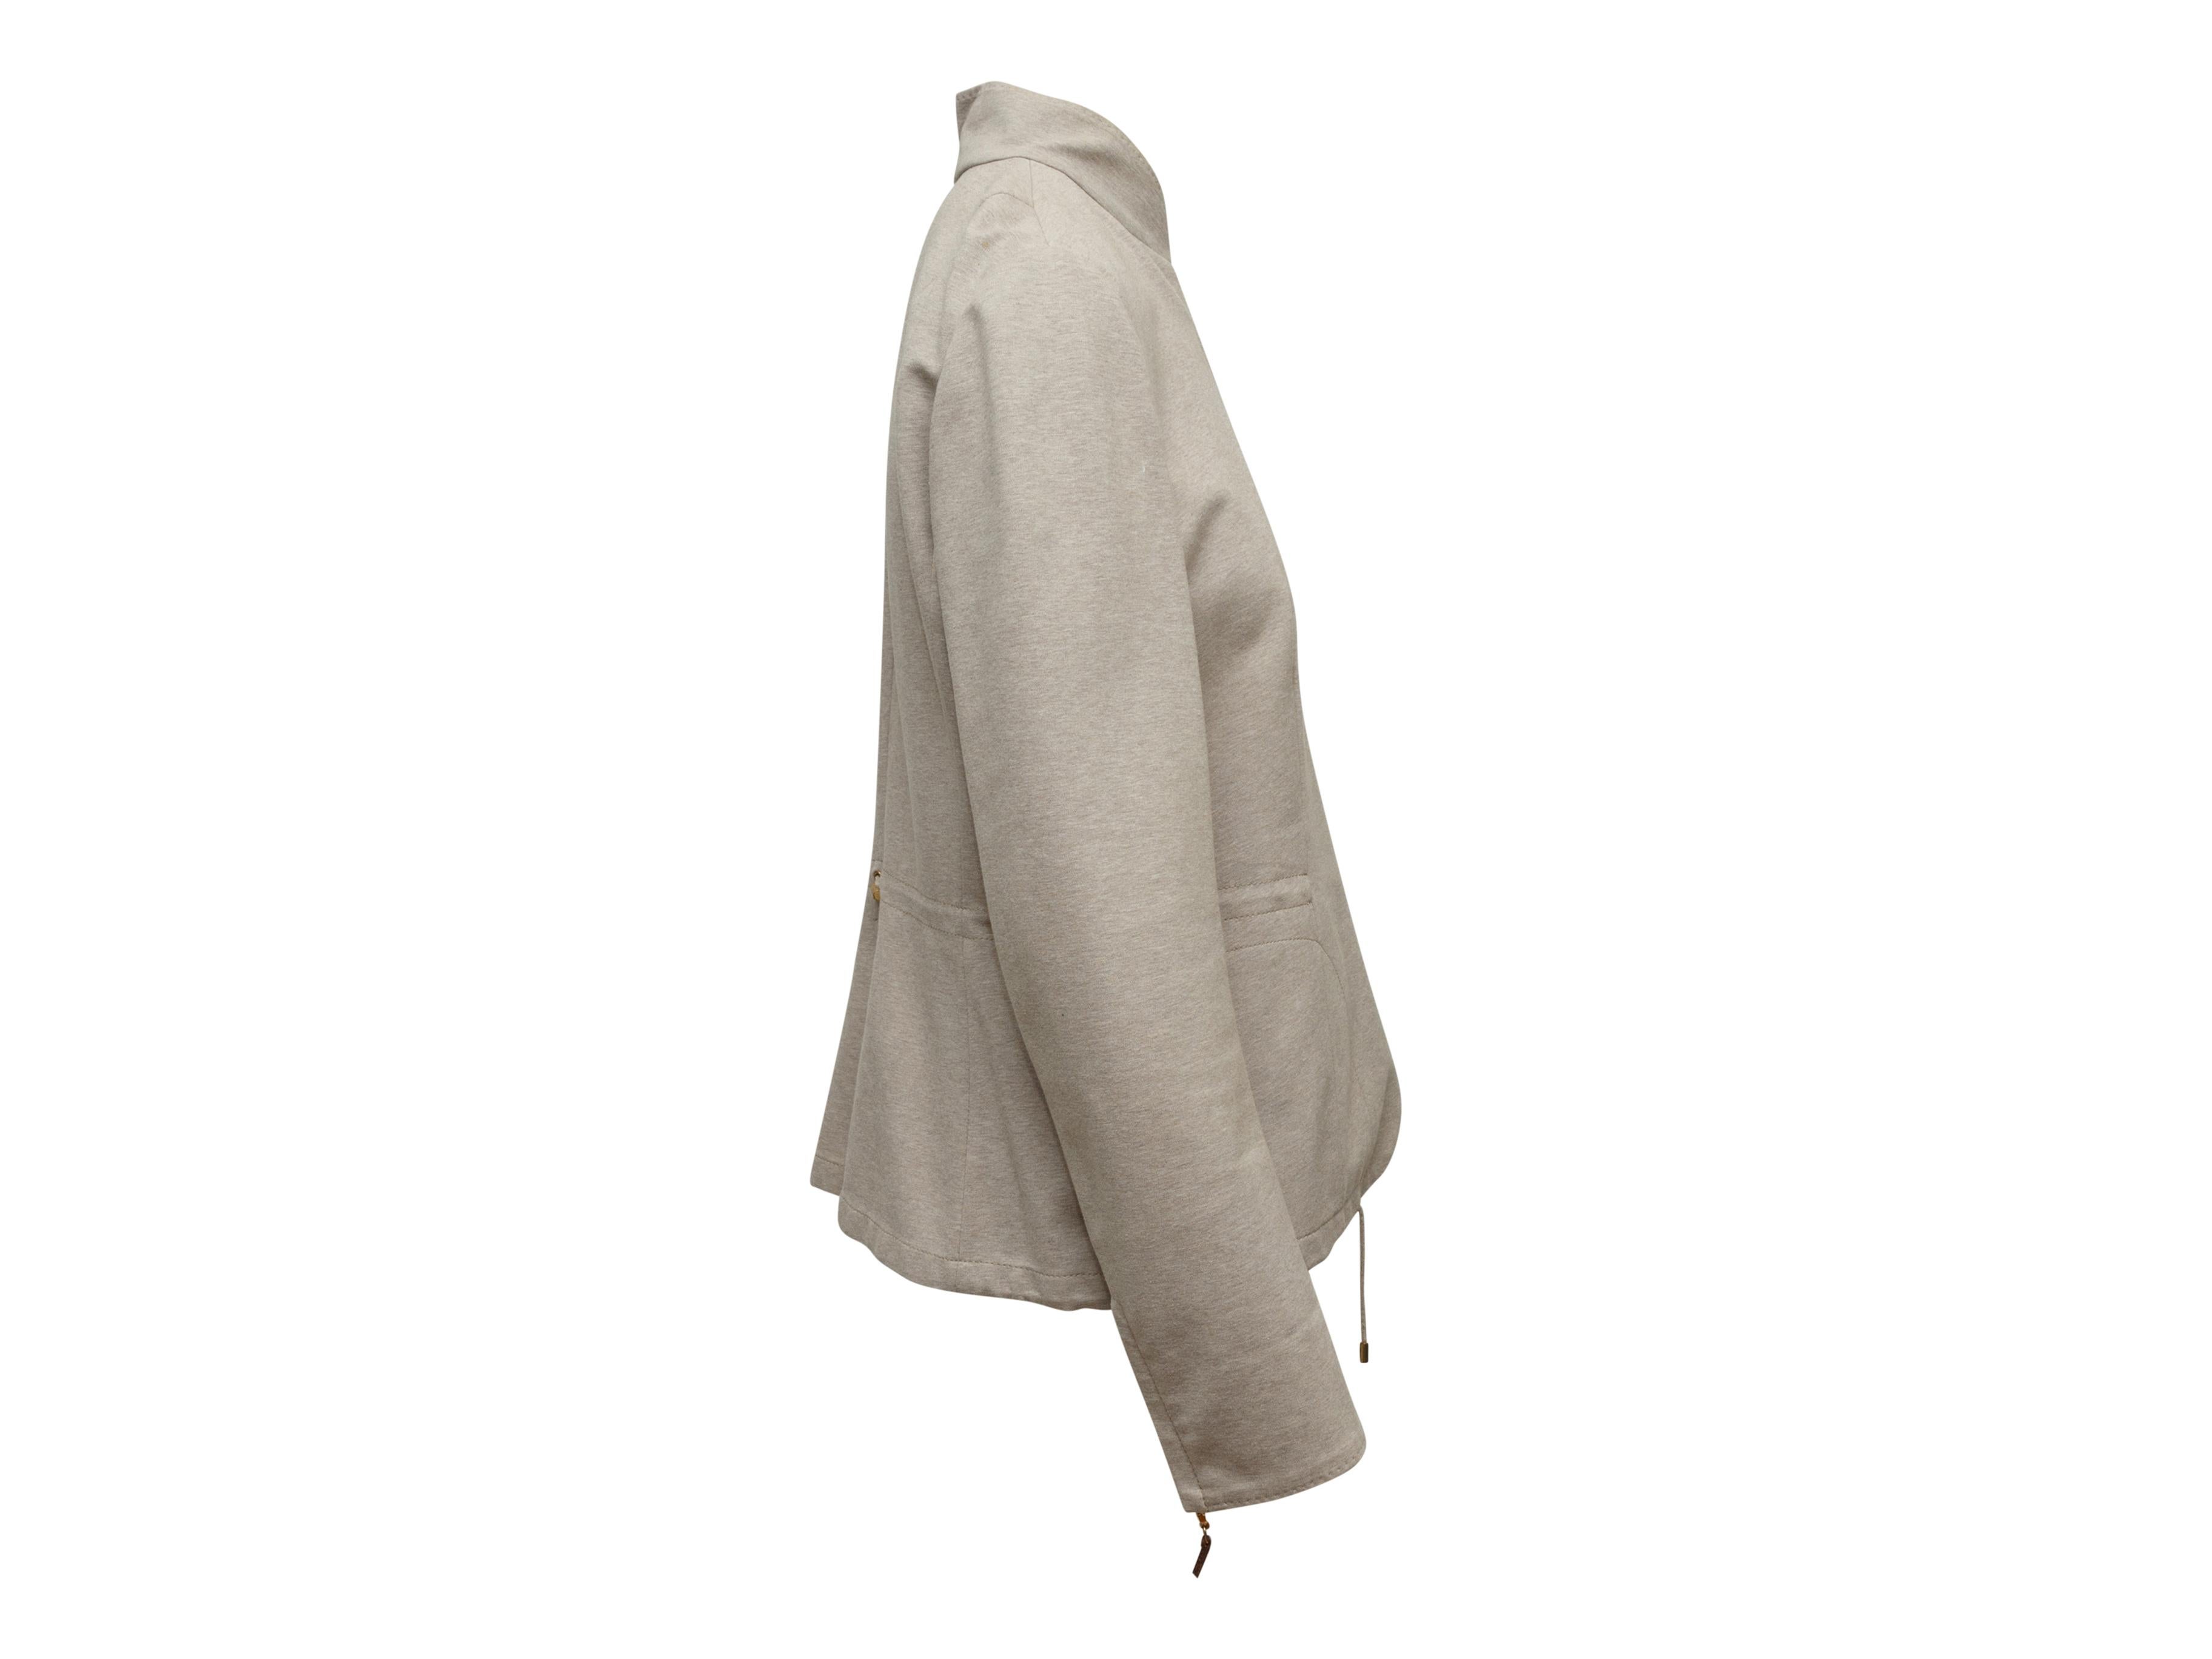 Product details: Light brown lightweight jacket by Brunello Cucinelli. Mandarin collar. Drawstring at waist and hem. Button closures at front. 36